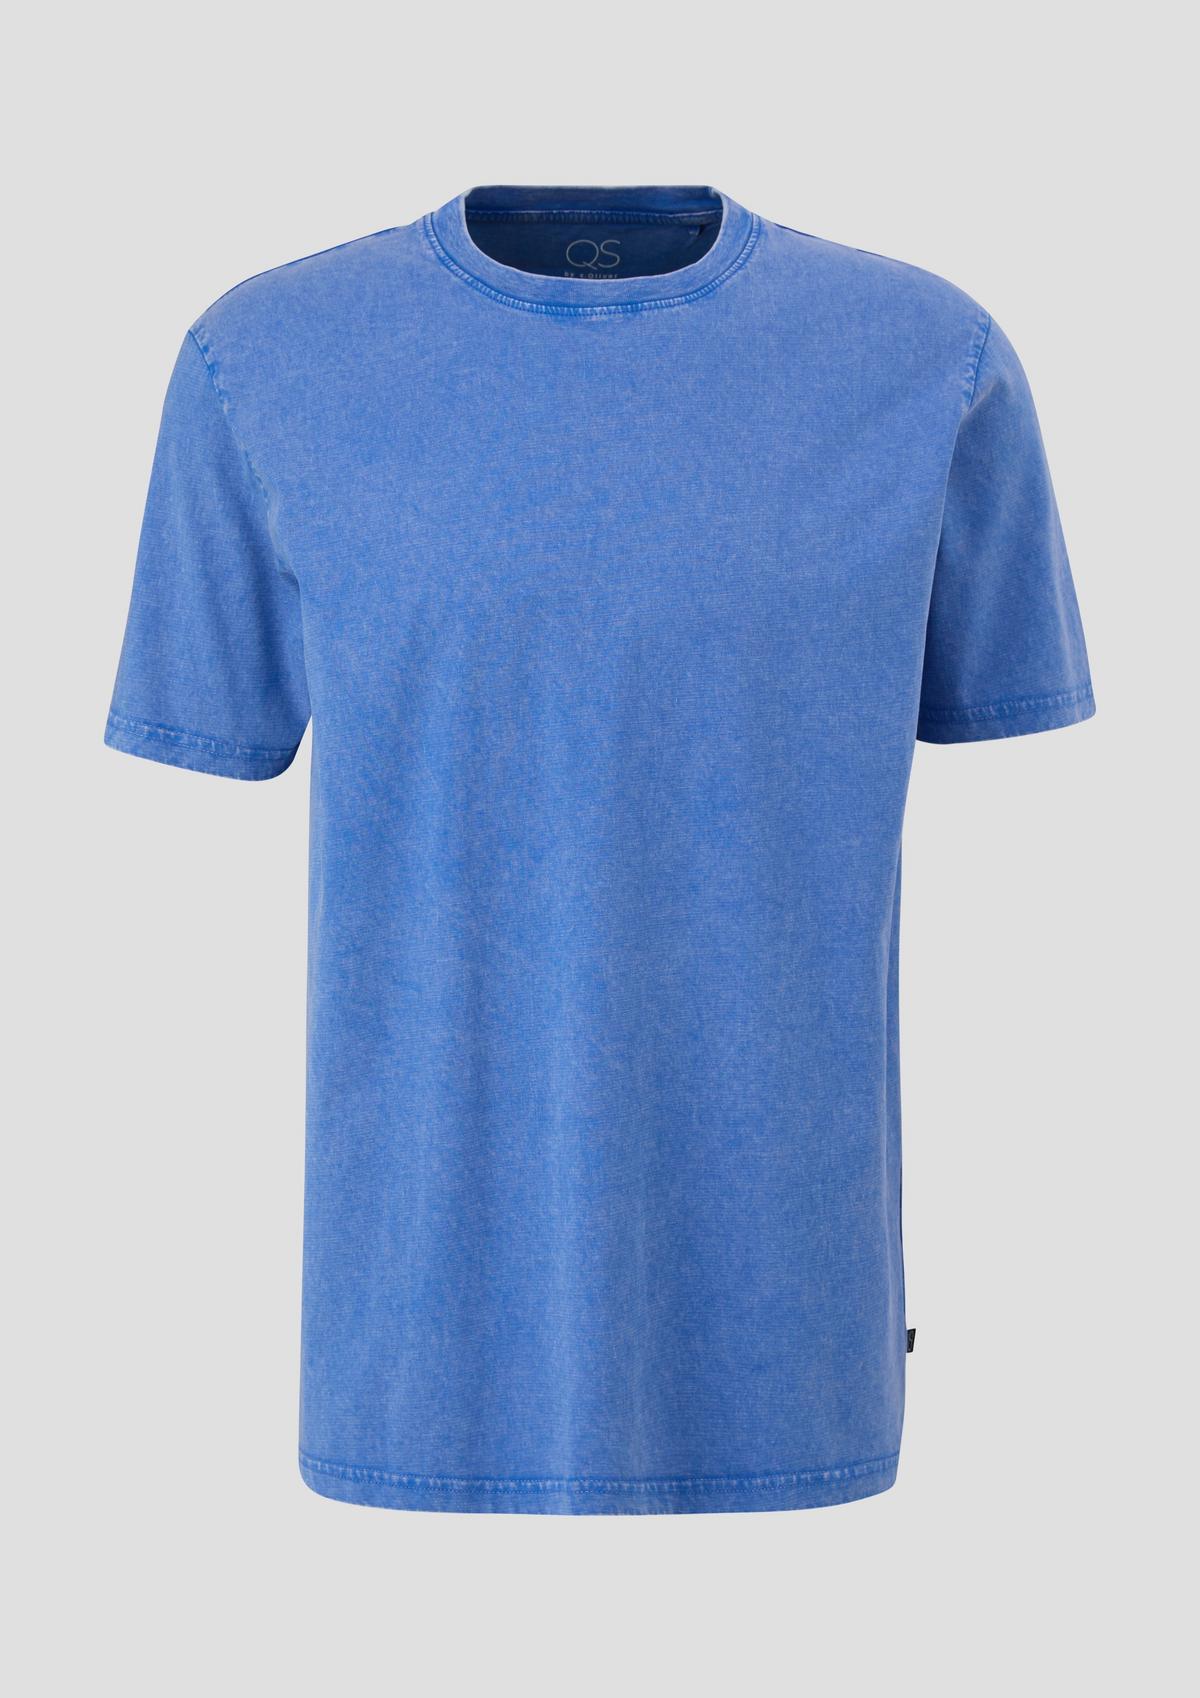 s.Oliver Garment-dyed cotton T-shirt